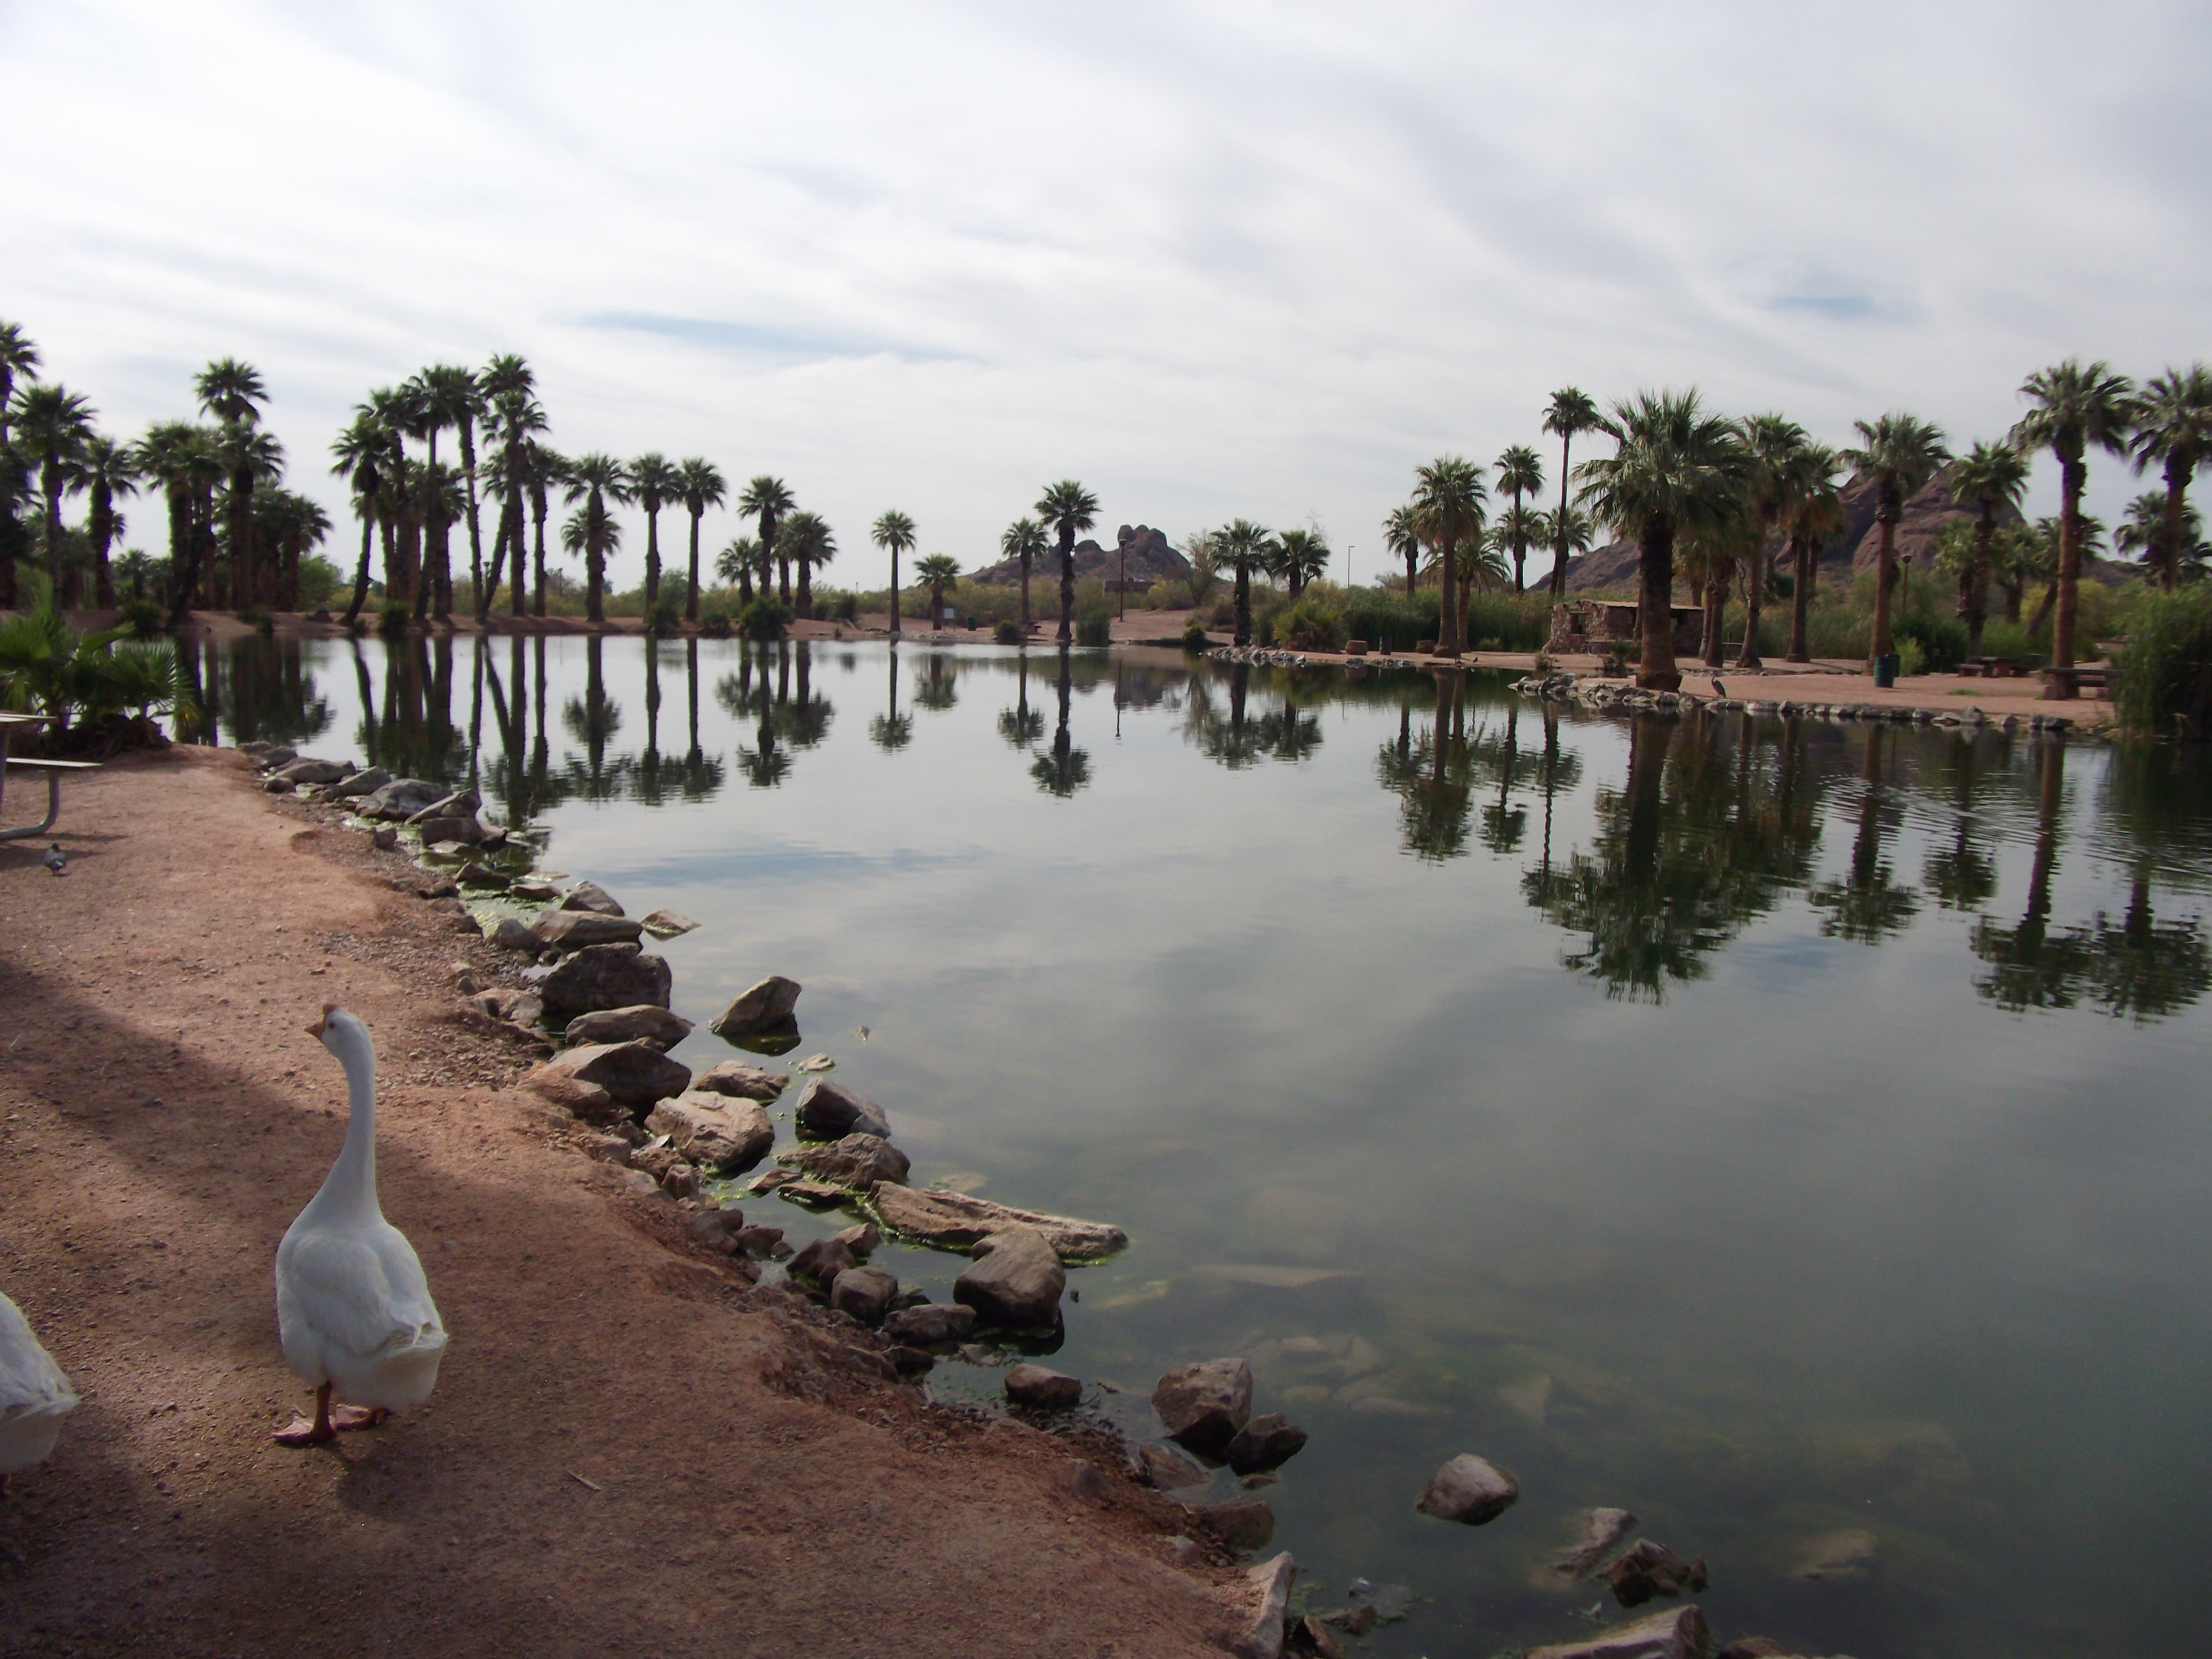 Geese on the Lake in Papago Park